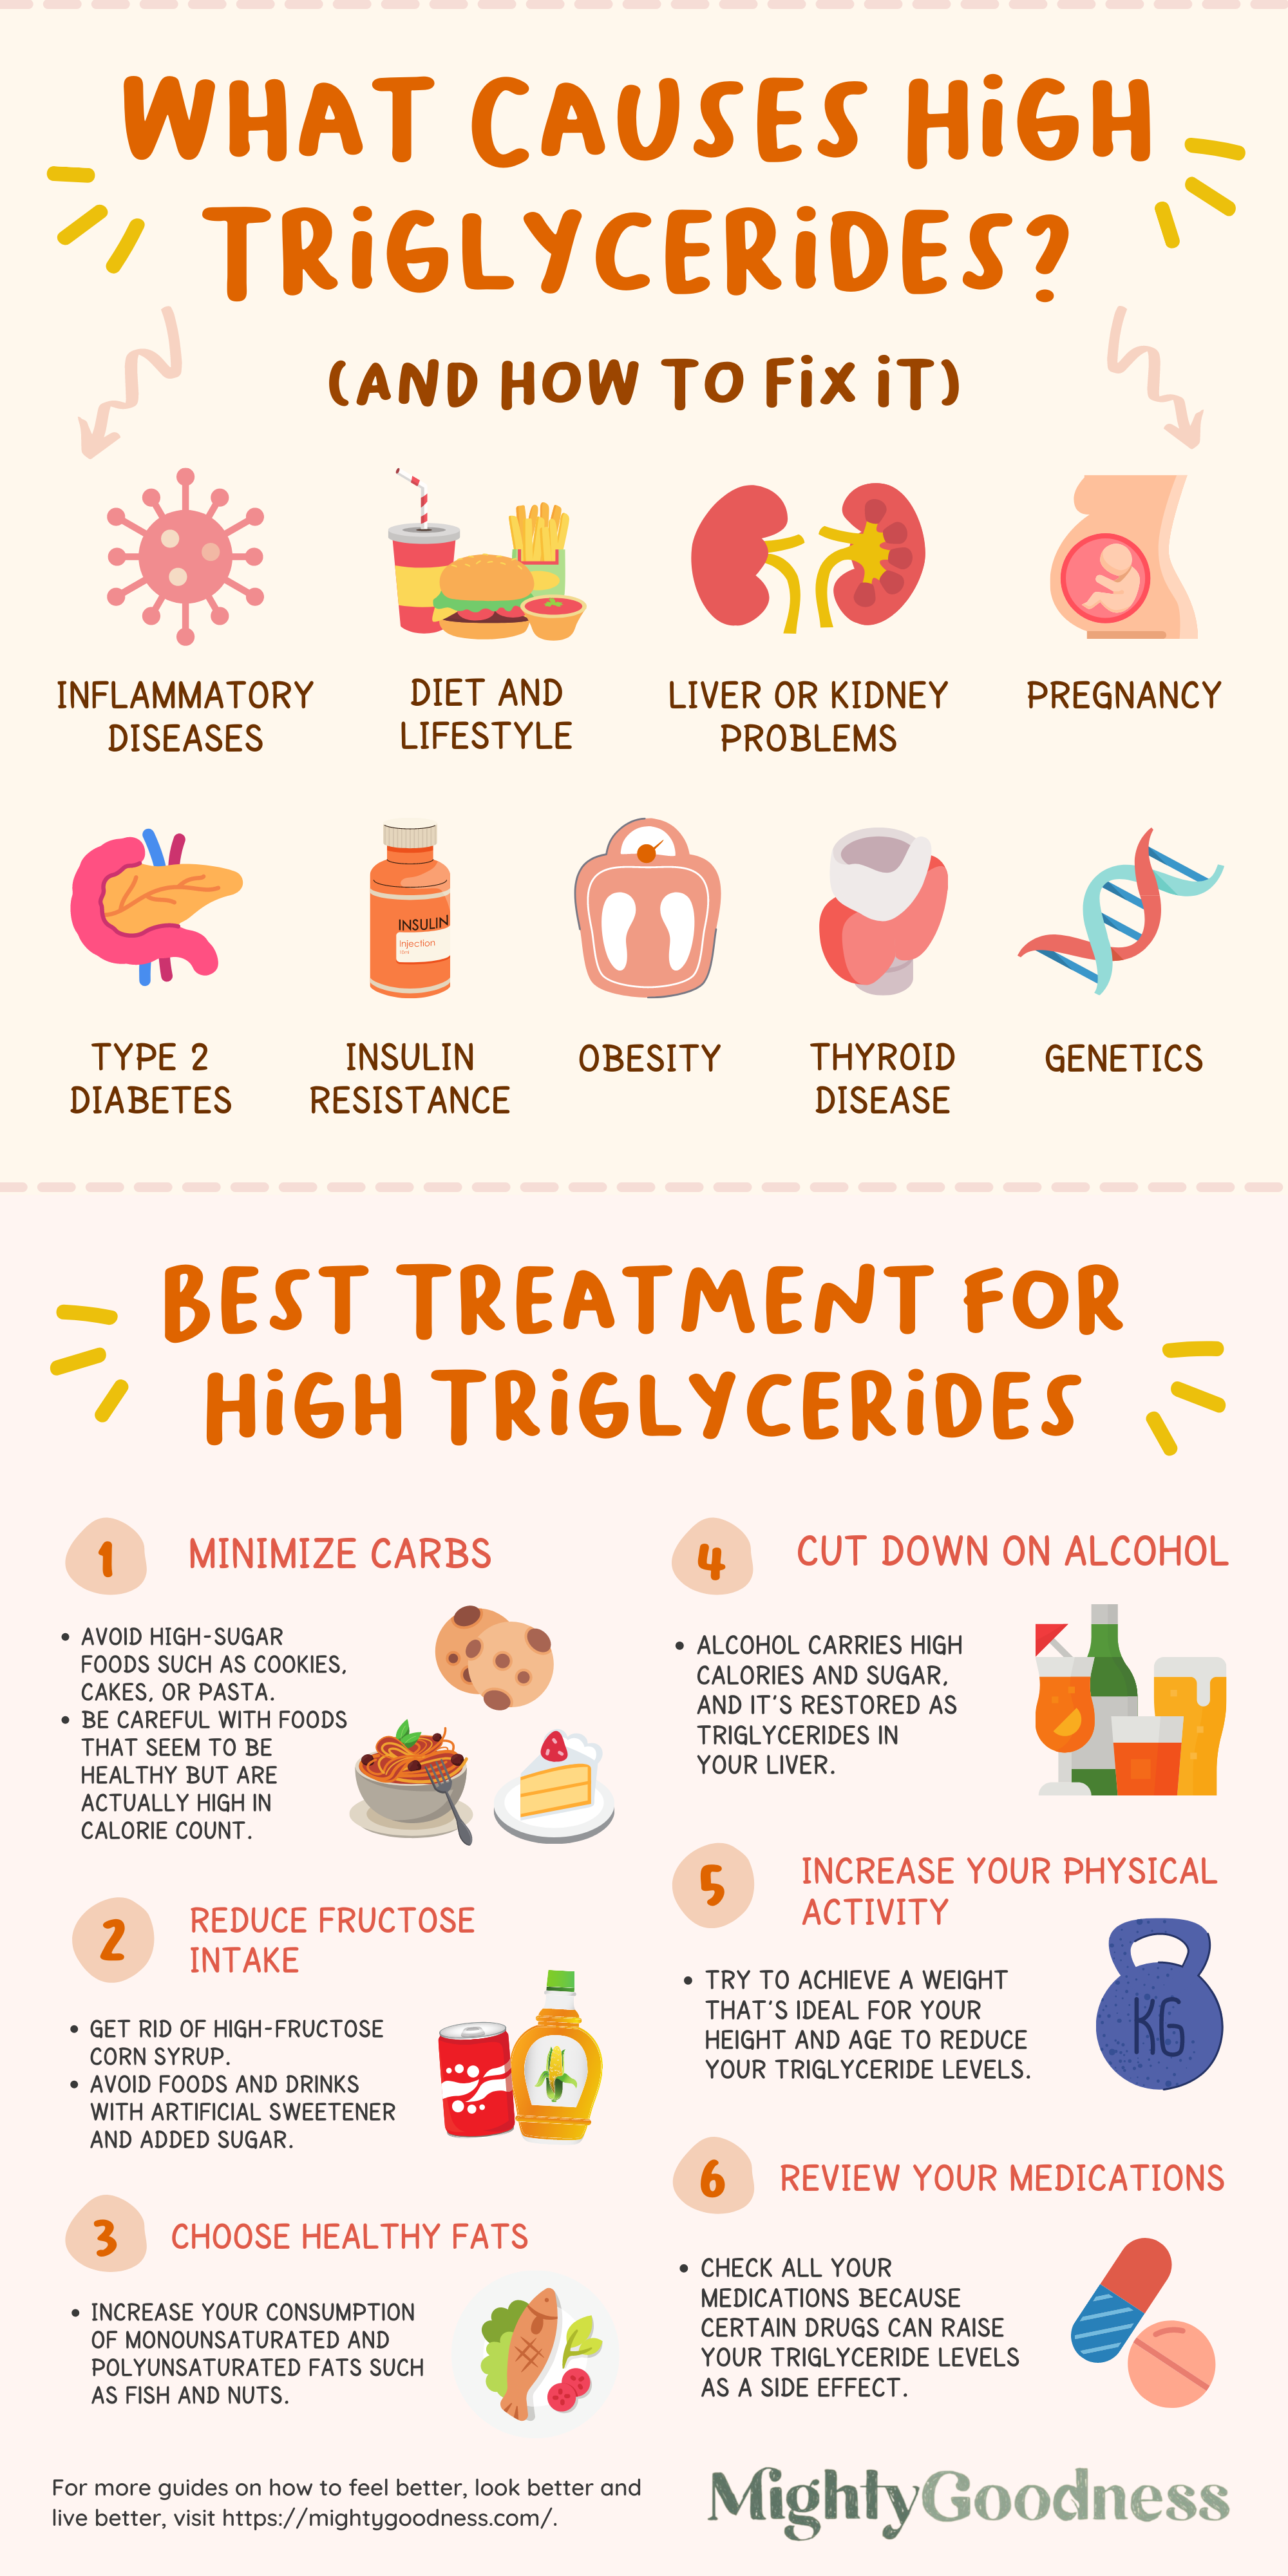 MG - What Causes High Triglycerides & How To Fix It